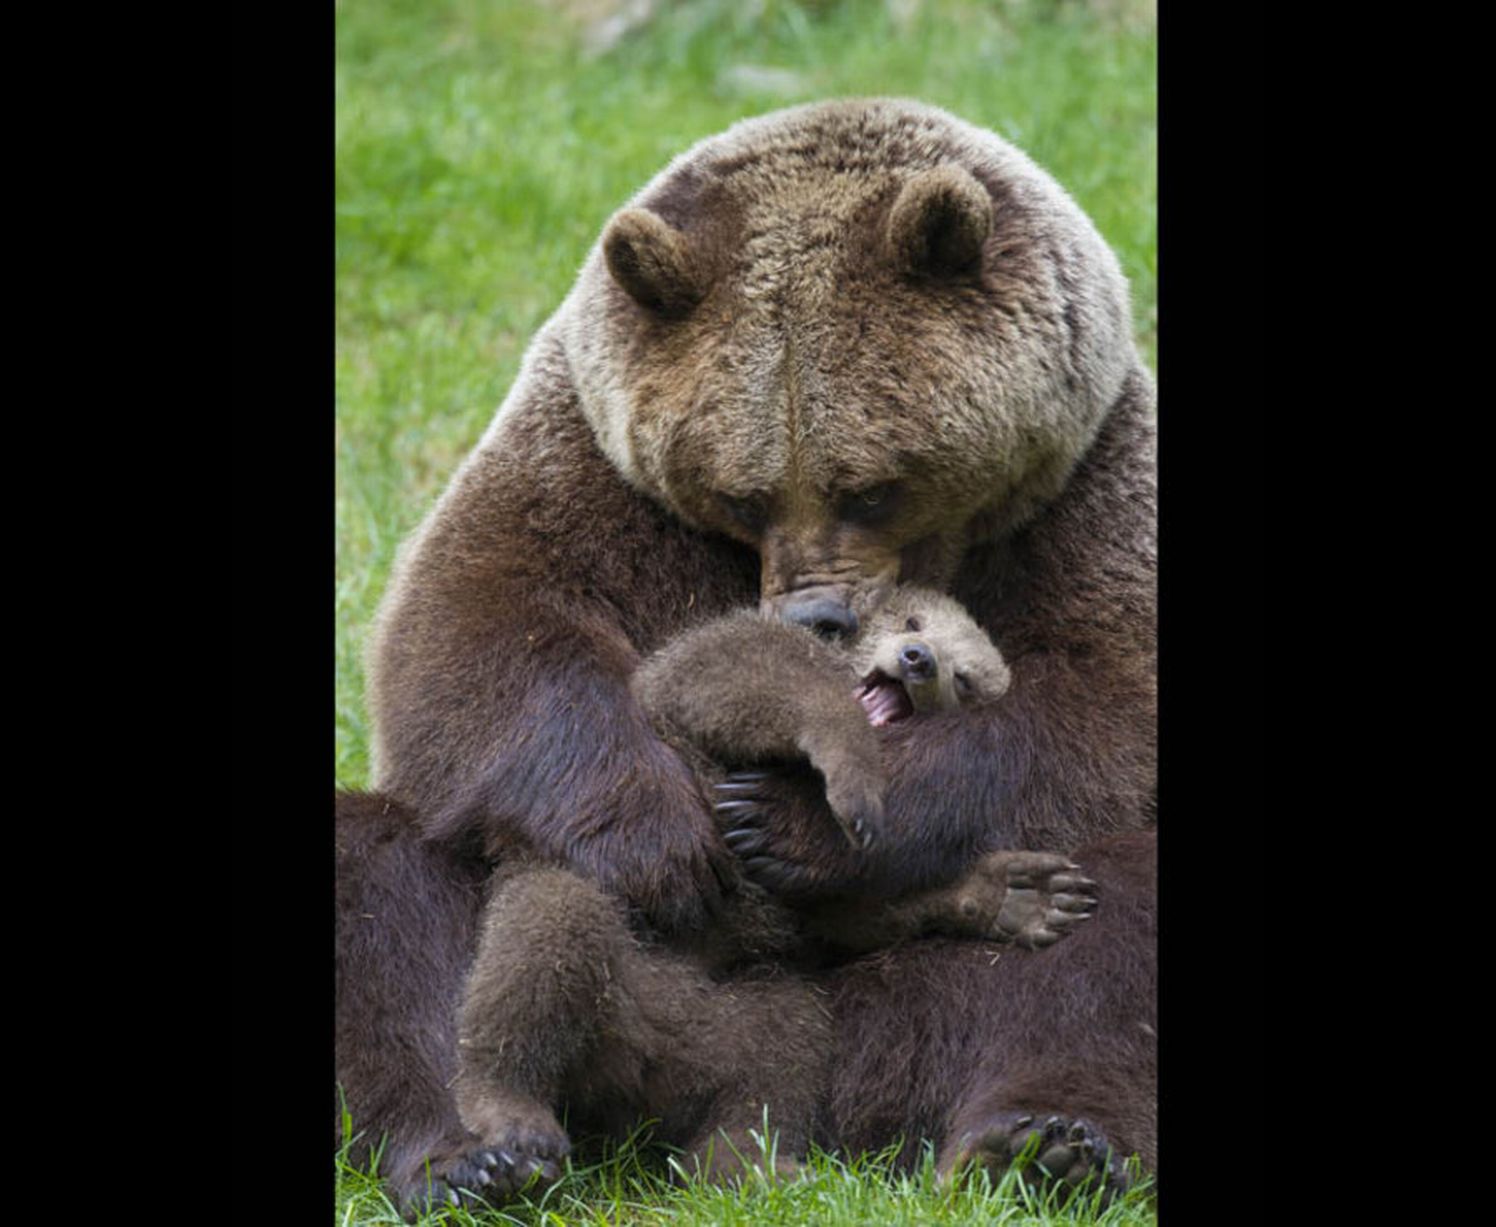 A cub squirming to get away from its mother's arms